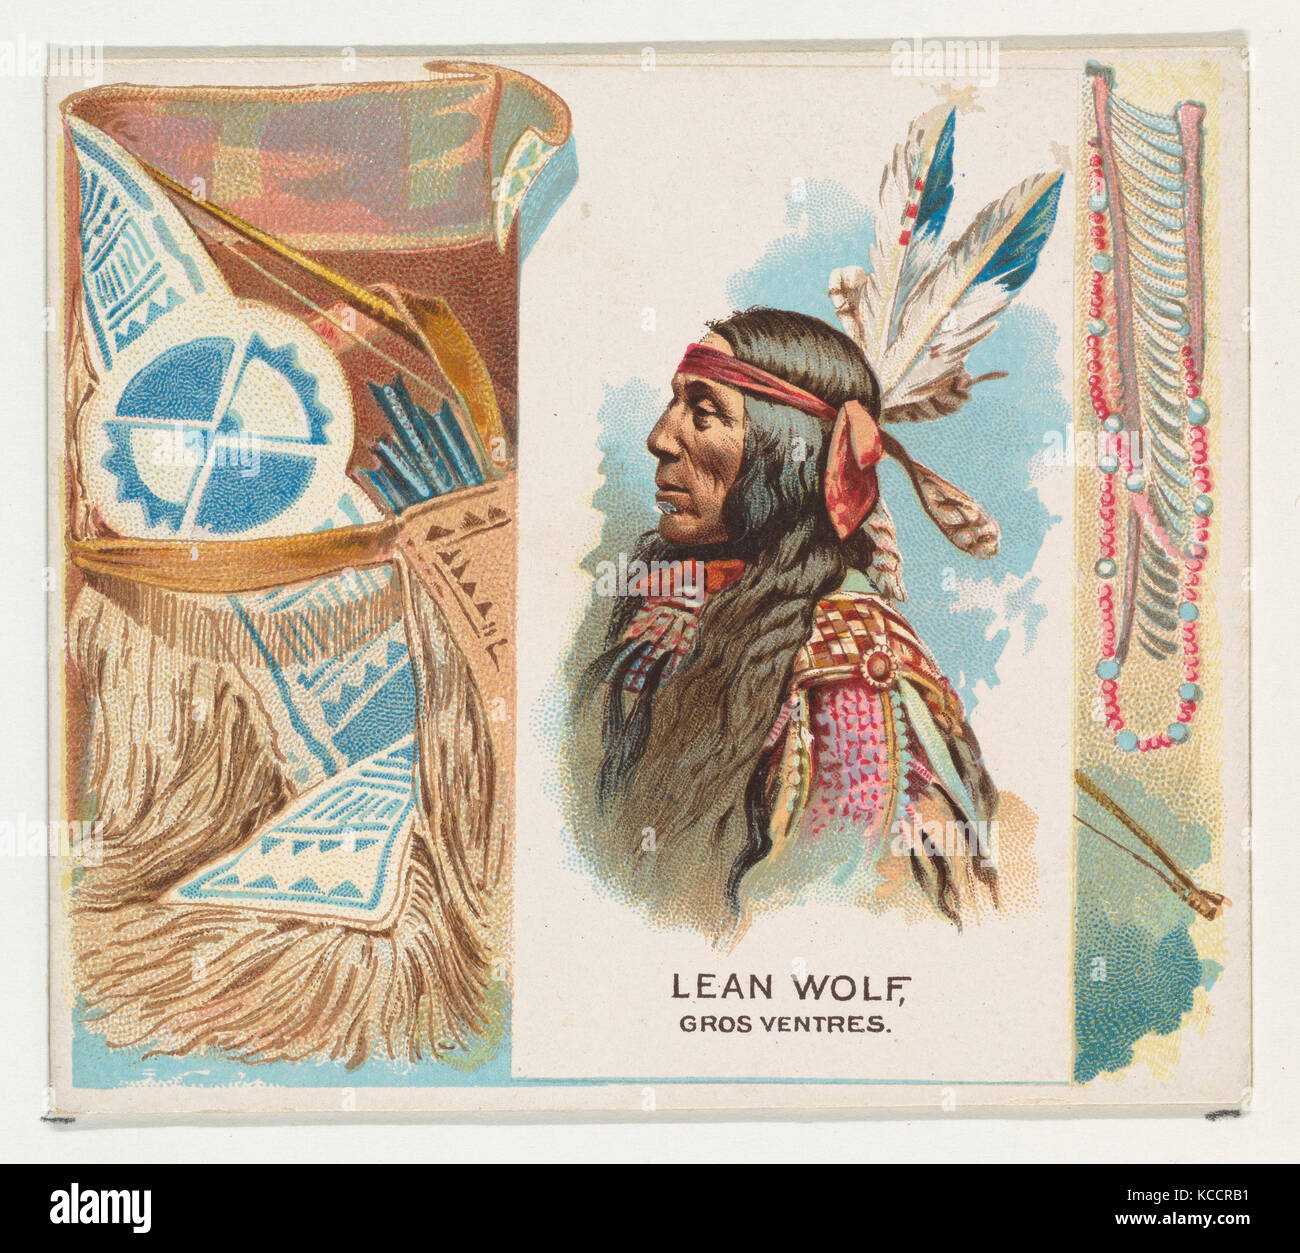 Lean Wolf, Gros Ventres, from the American Indian Chiefs series (N36) for Allen & Ginter Cigarettes, 1888 Stock Photo